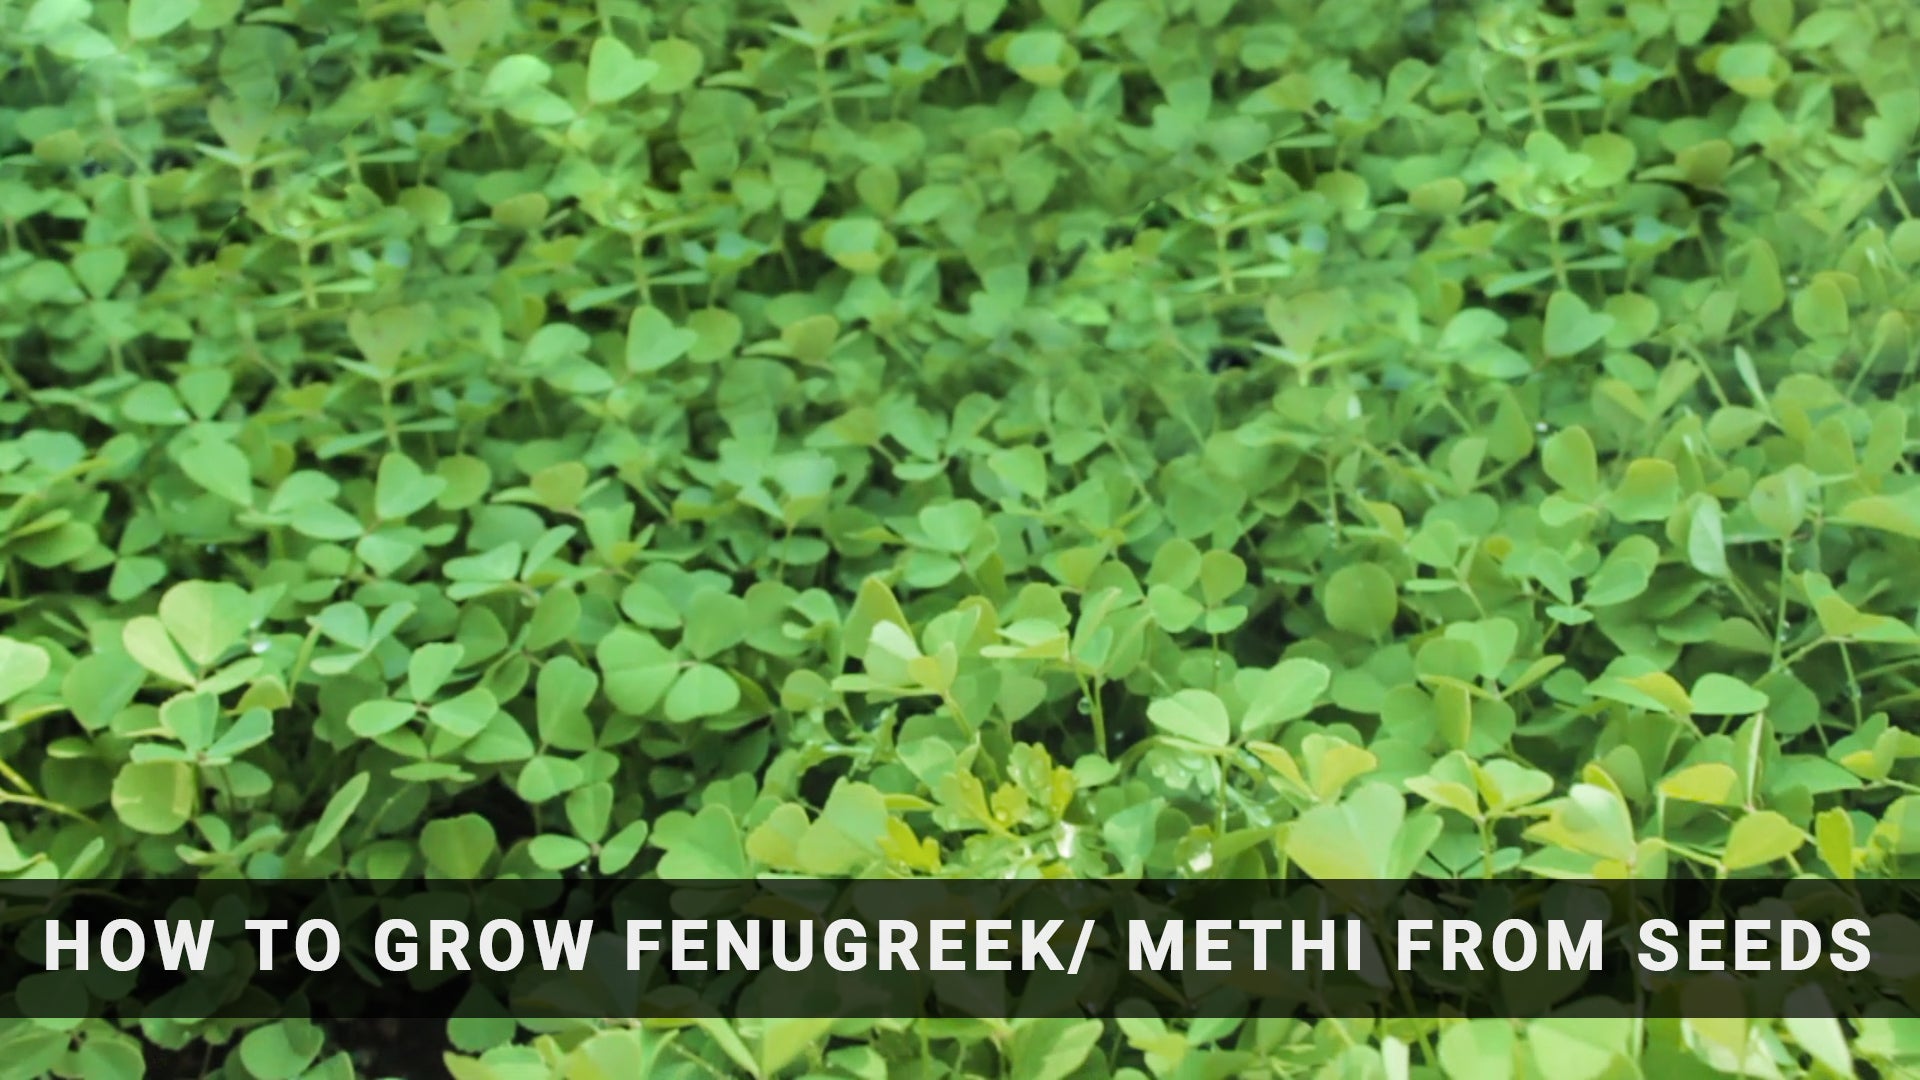 How to Grow Methi (Fenugreek) from Seeds at Home Easily